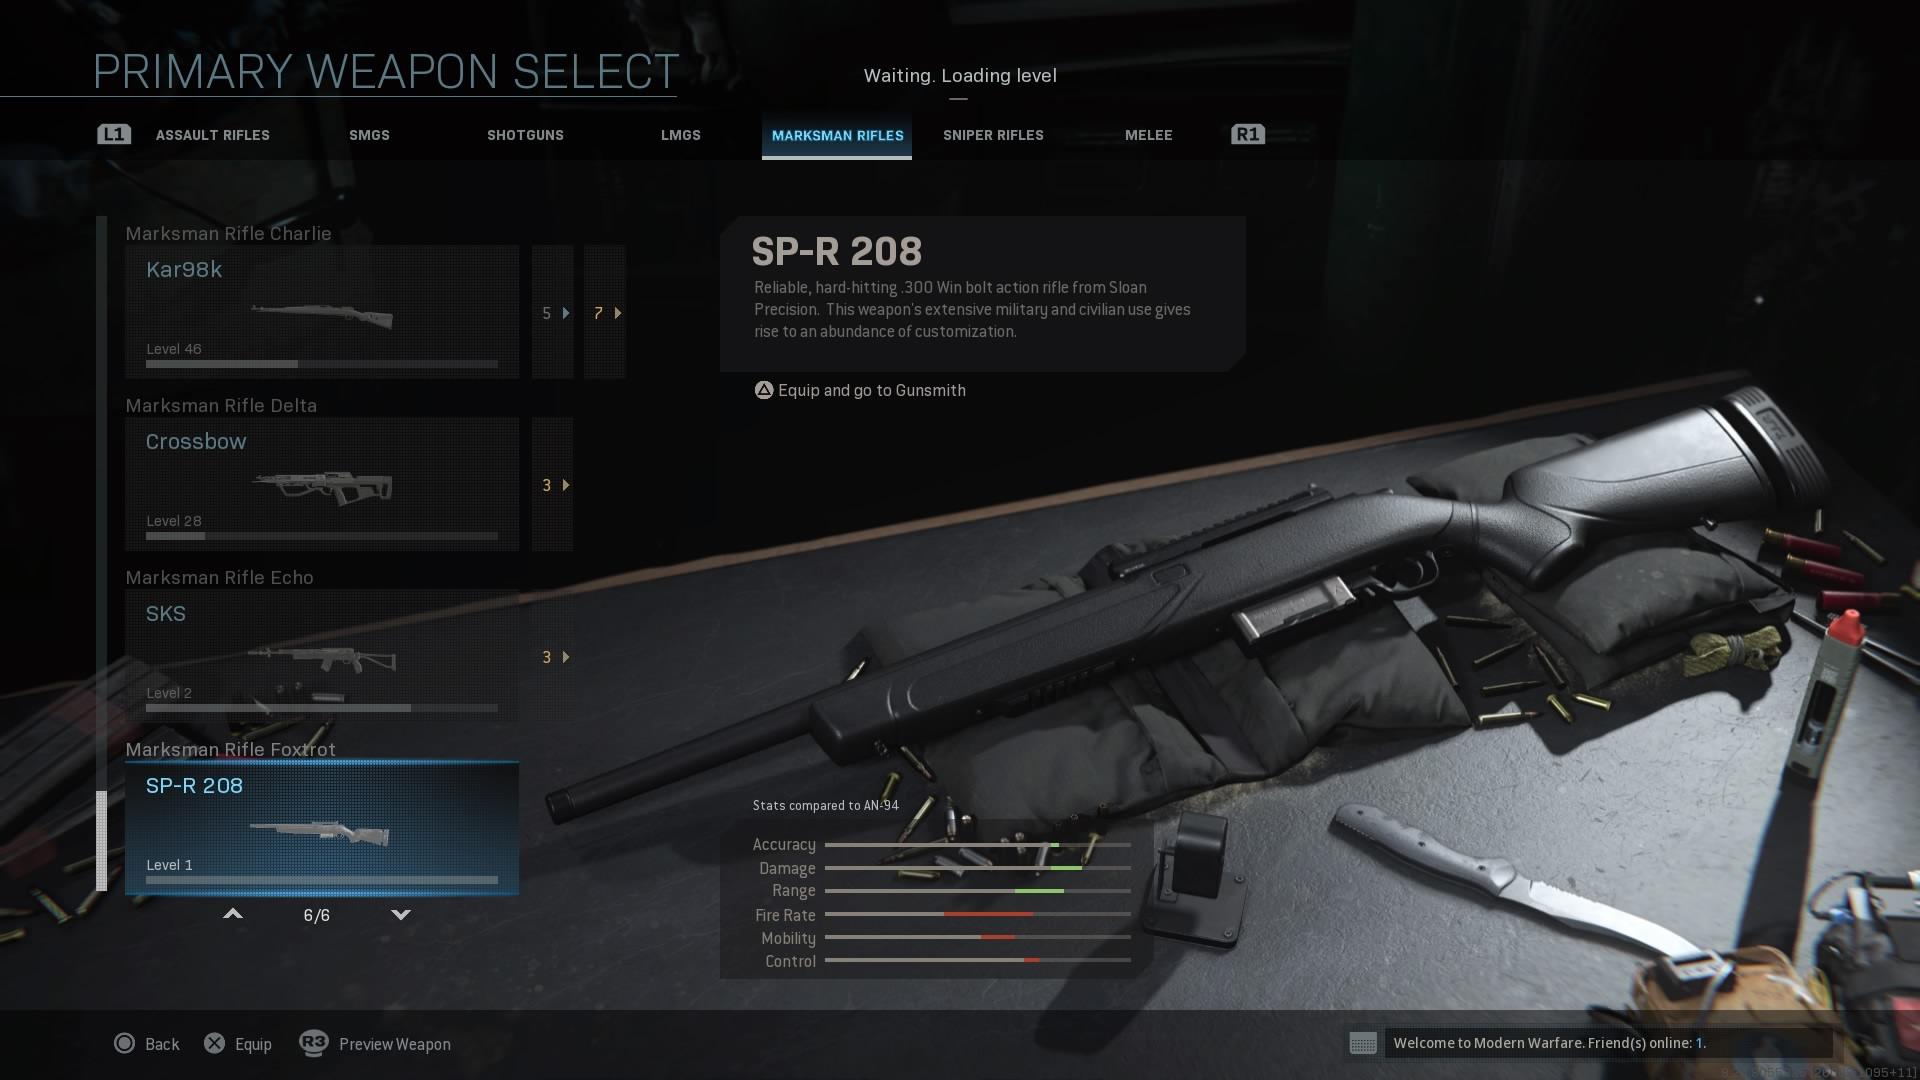 The SP-R 208 marksman rifle as it appears in the Modern Warfare armory.